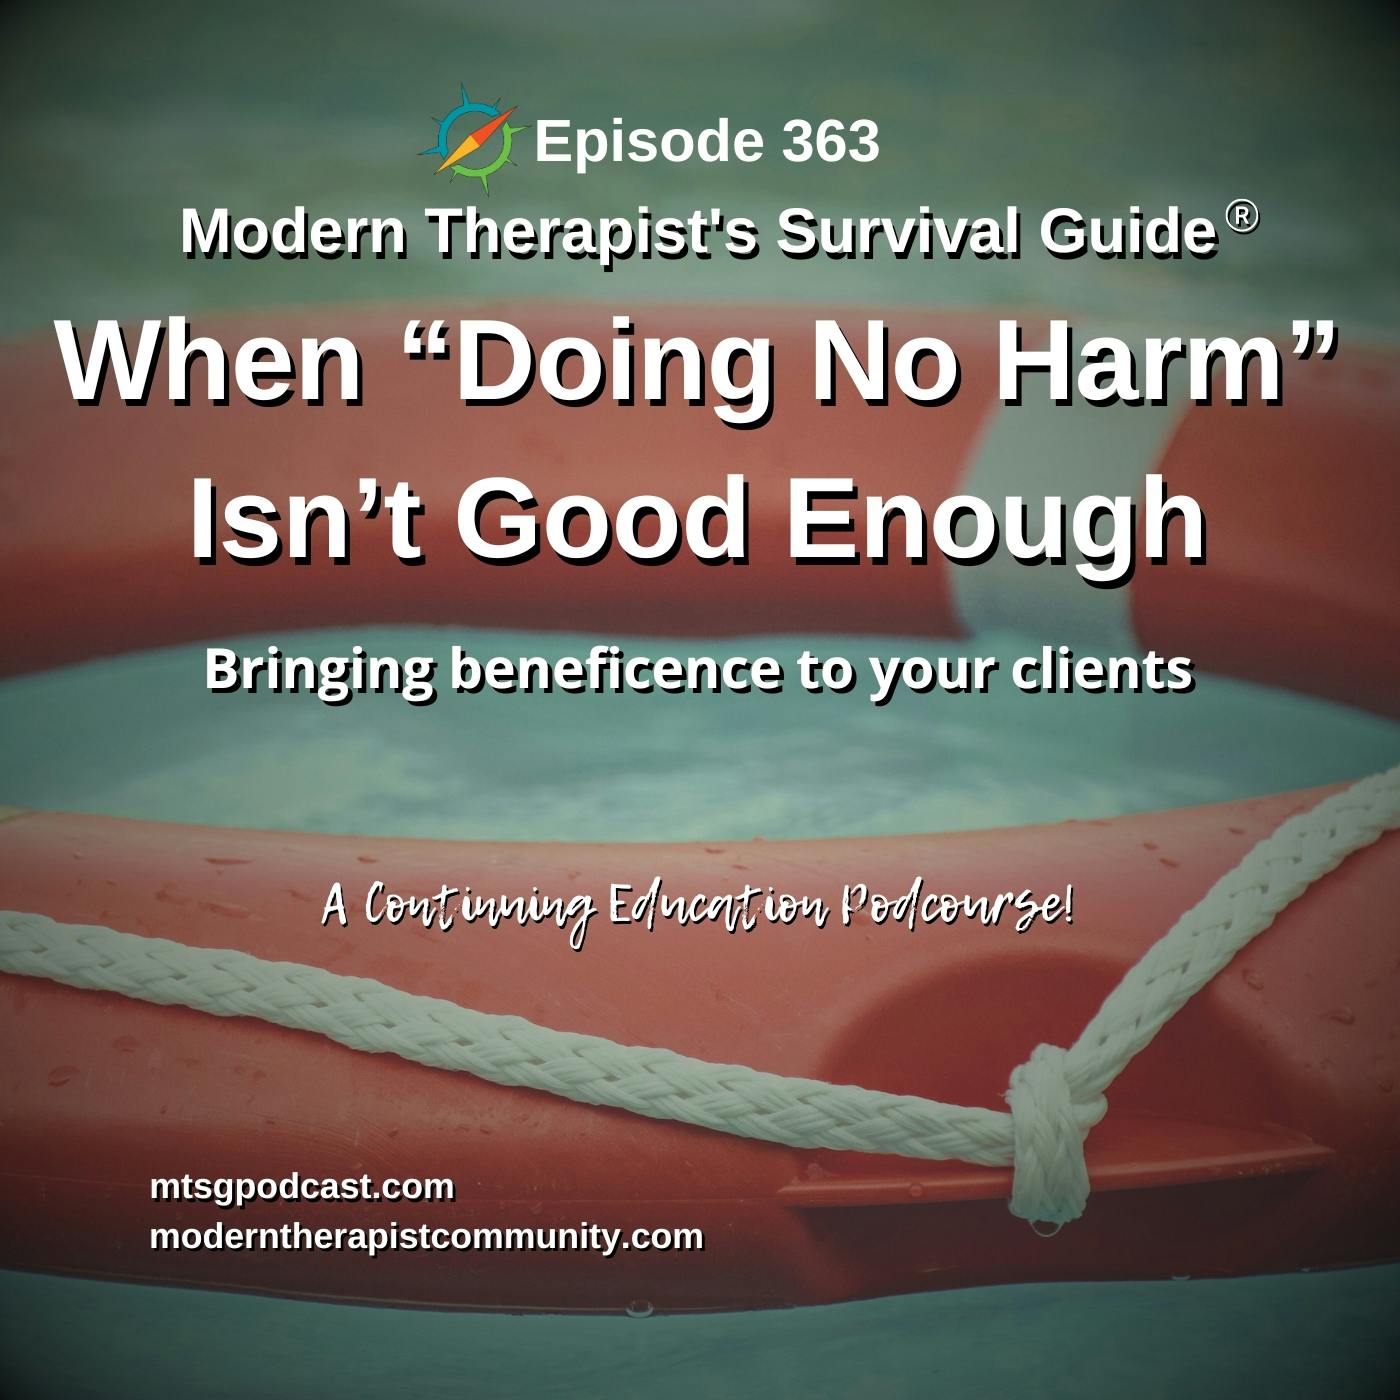 When Doing “No Harm” Isn’t Good Enough: Bringing beneficence to your clients